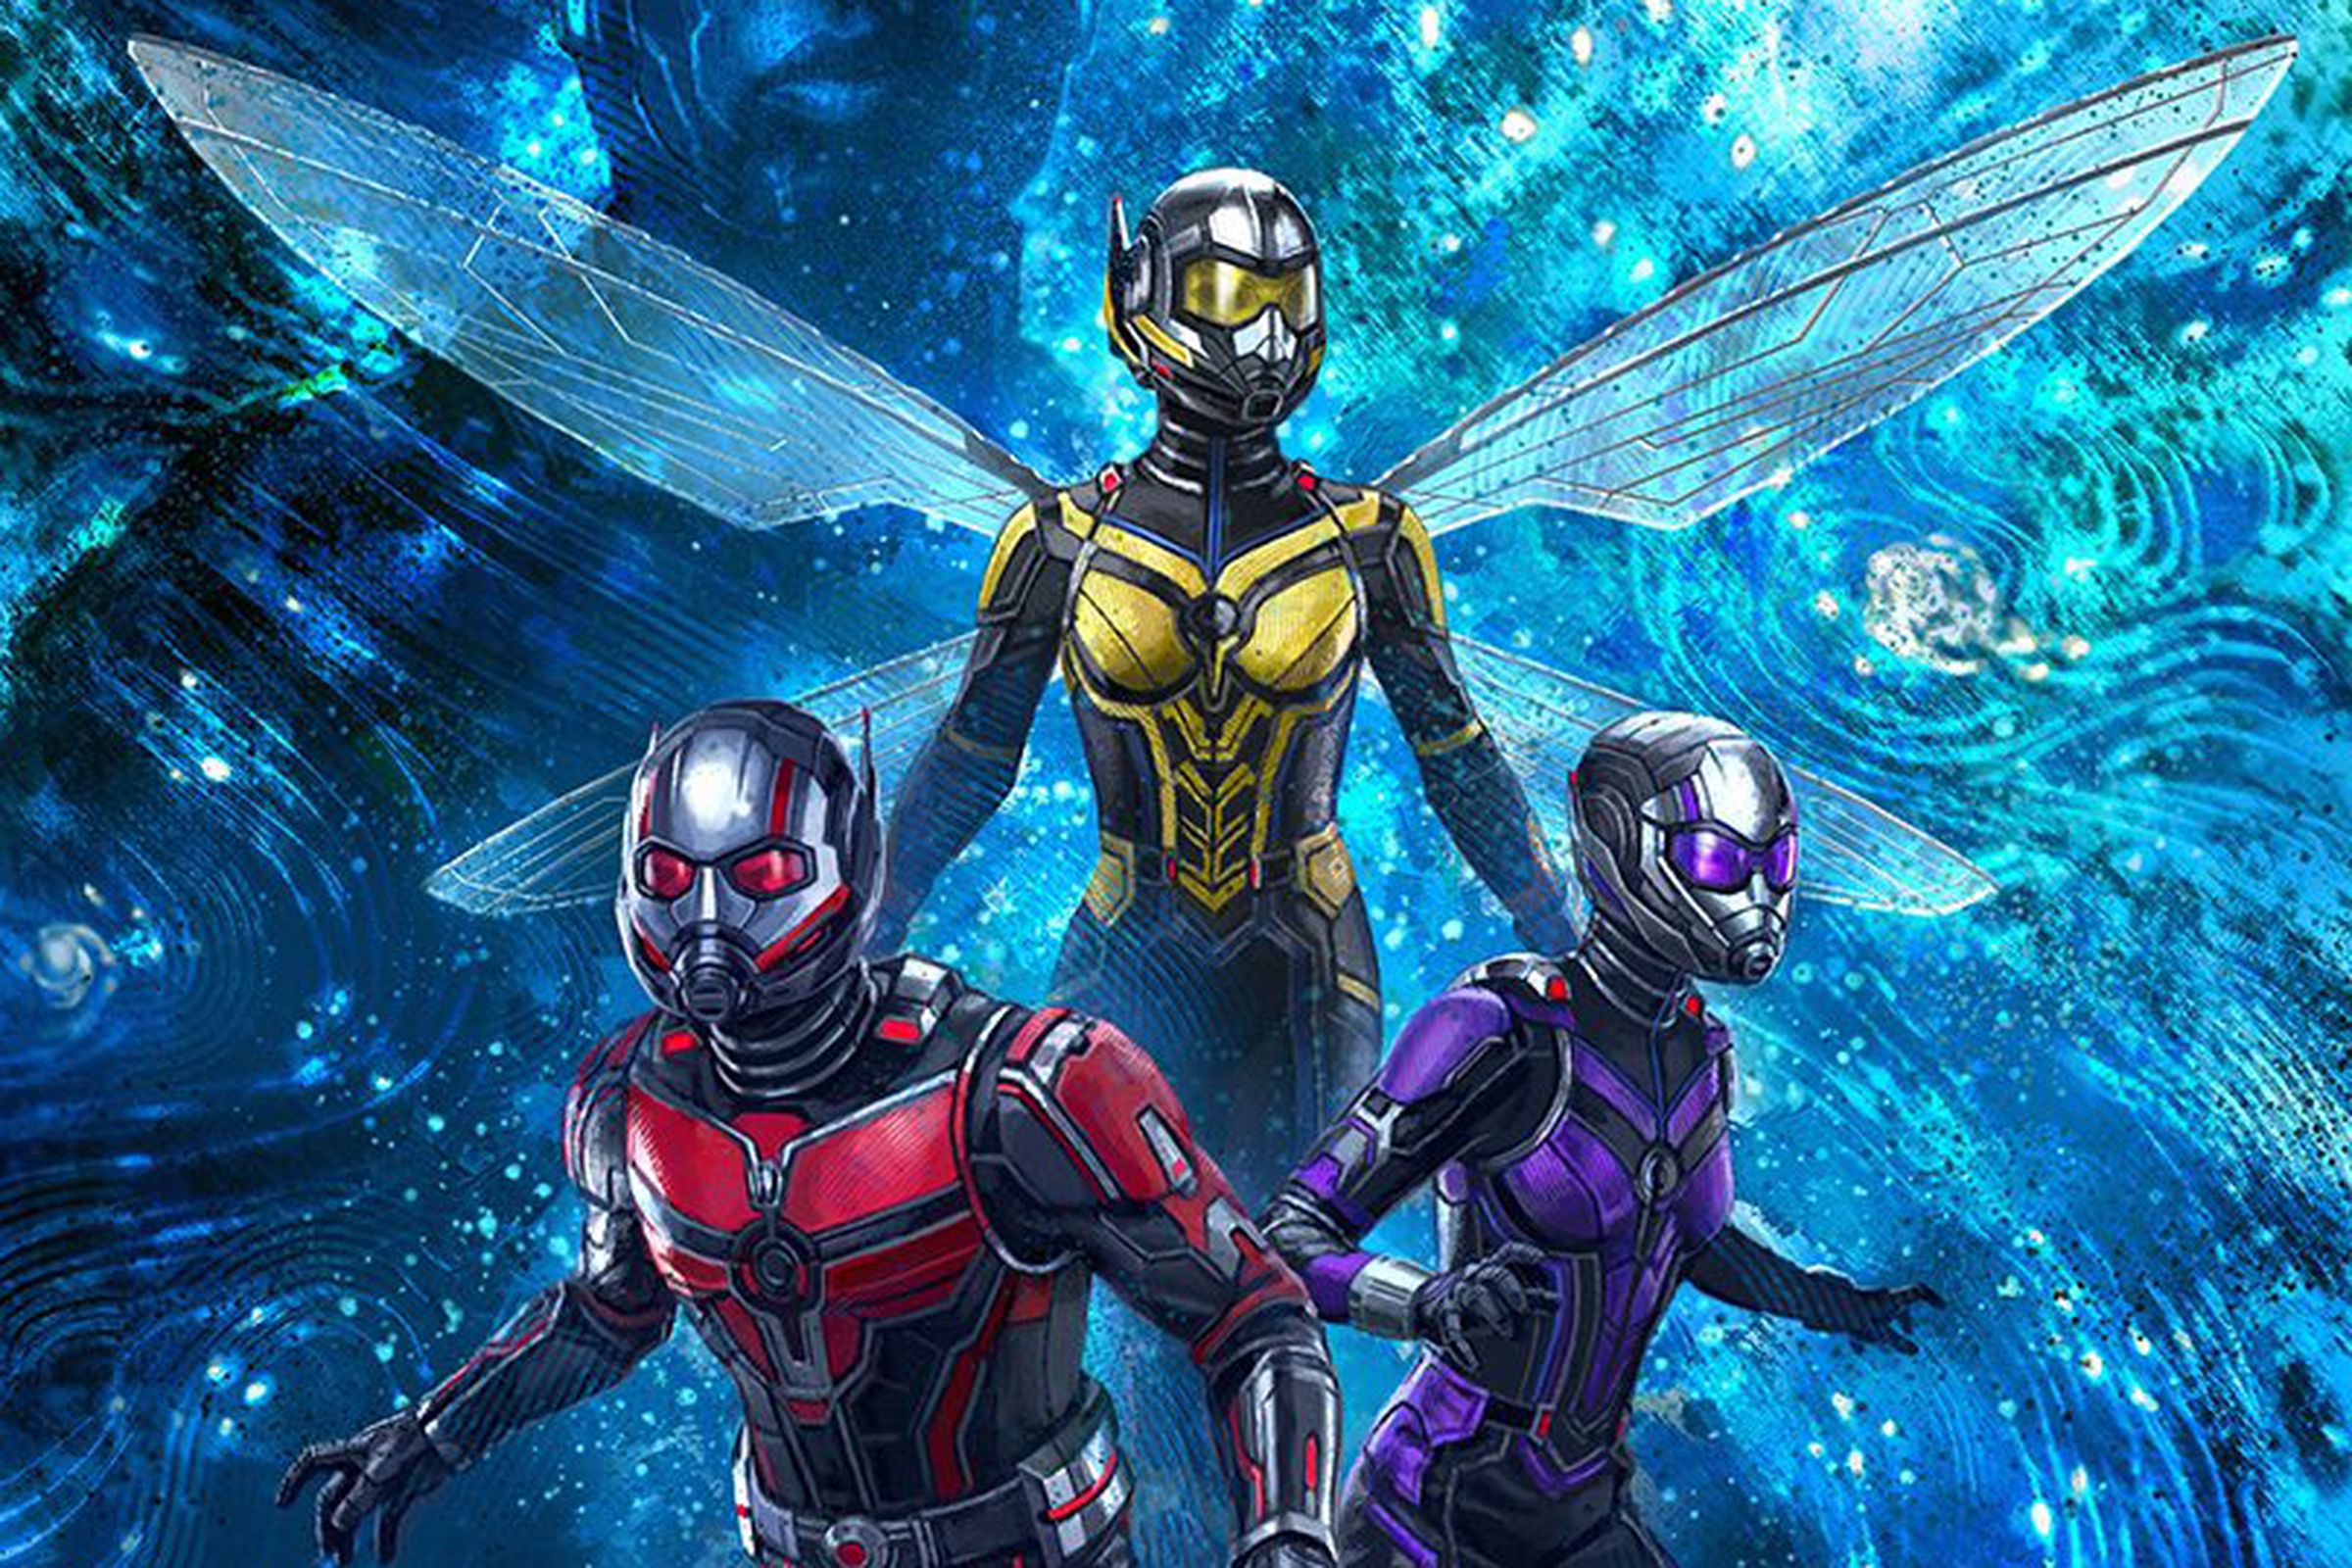 Concept art for Ant-Man & The Wasp: Quantumania.